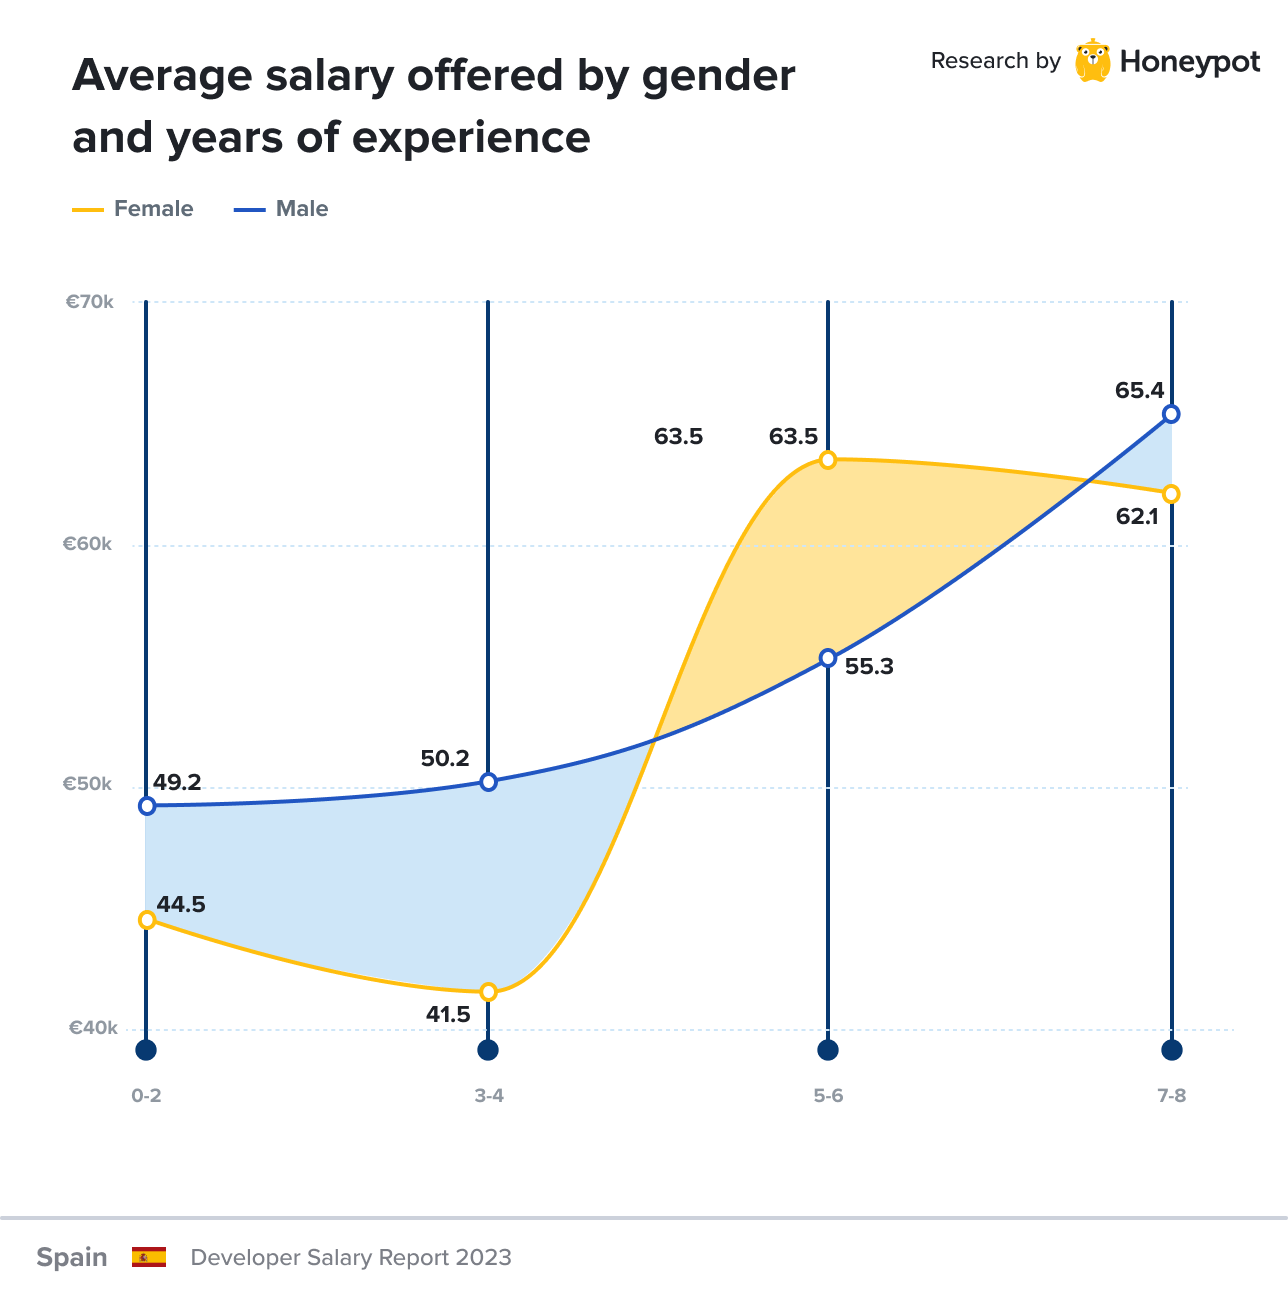 Spain – Average offered salary by gender and years of exbyience